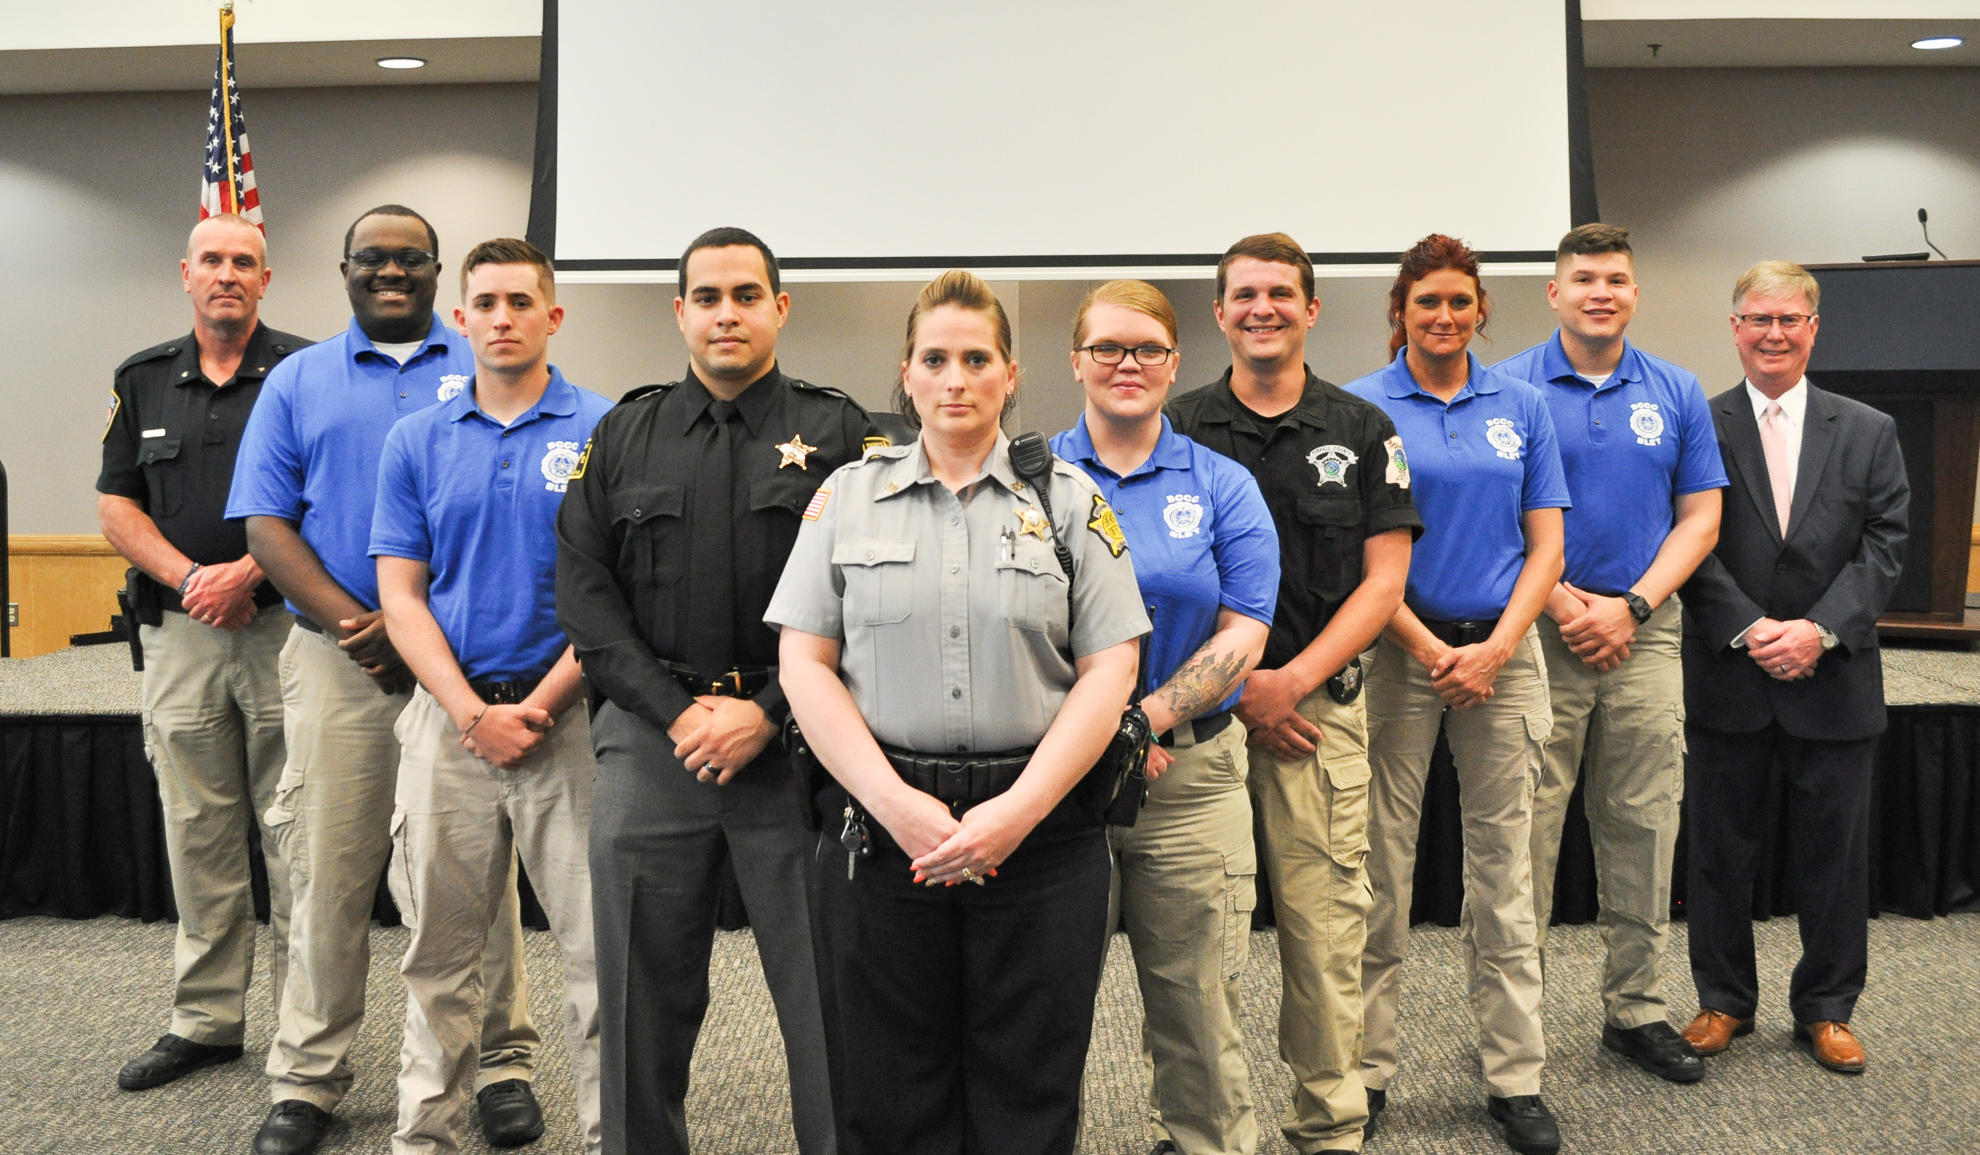 A group of law enforcement students